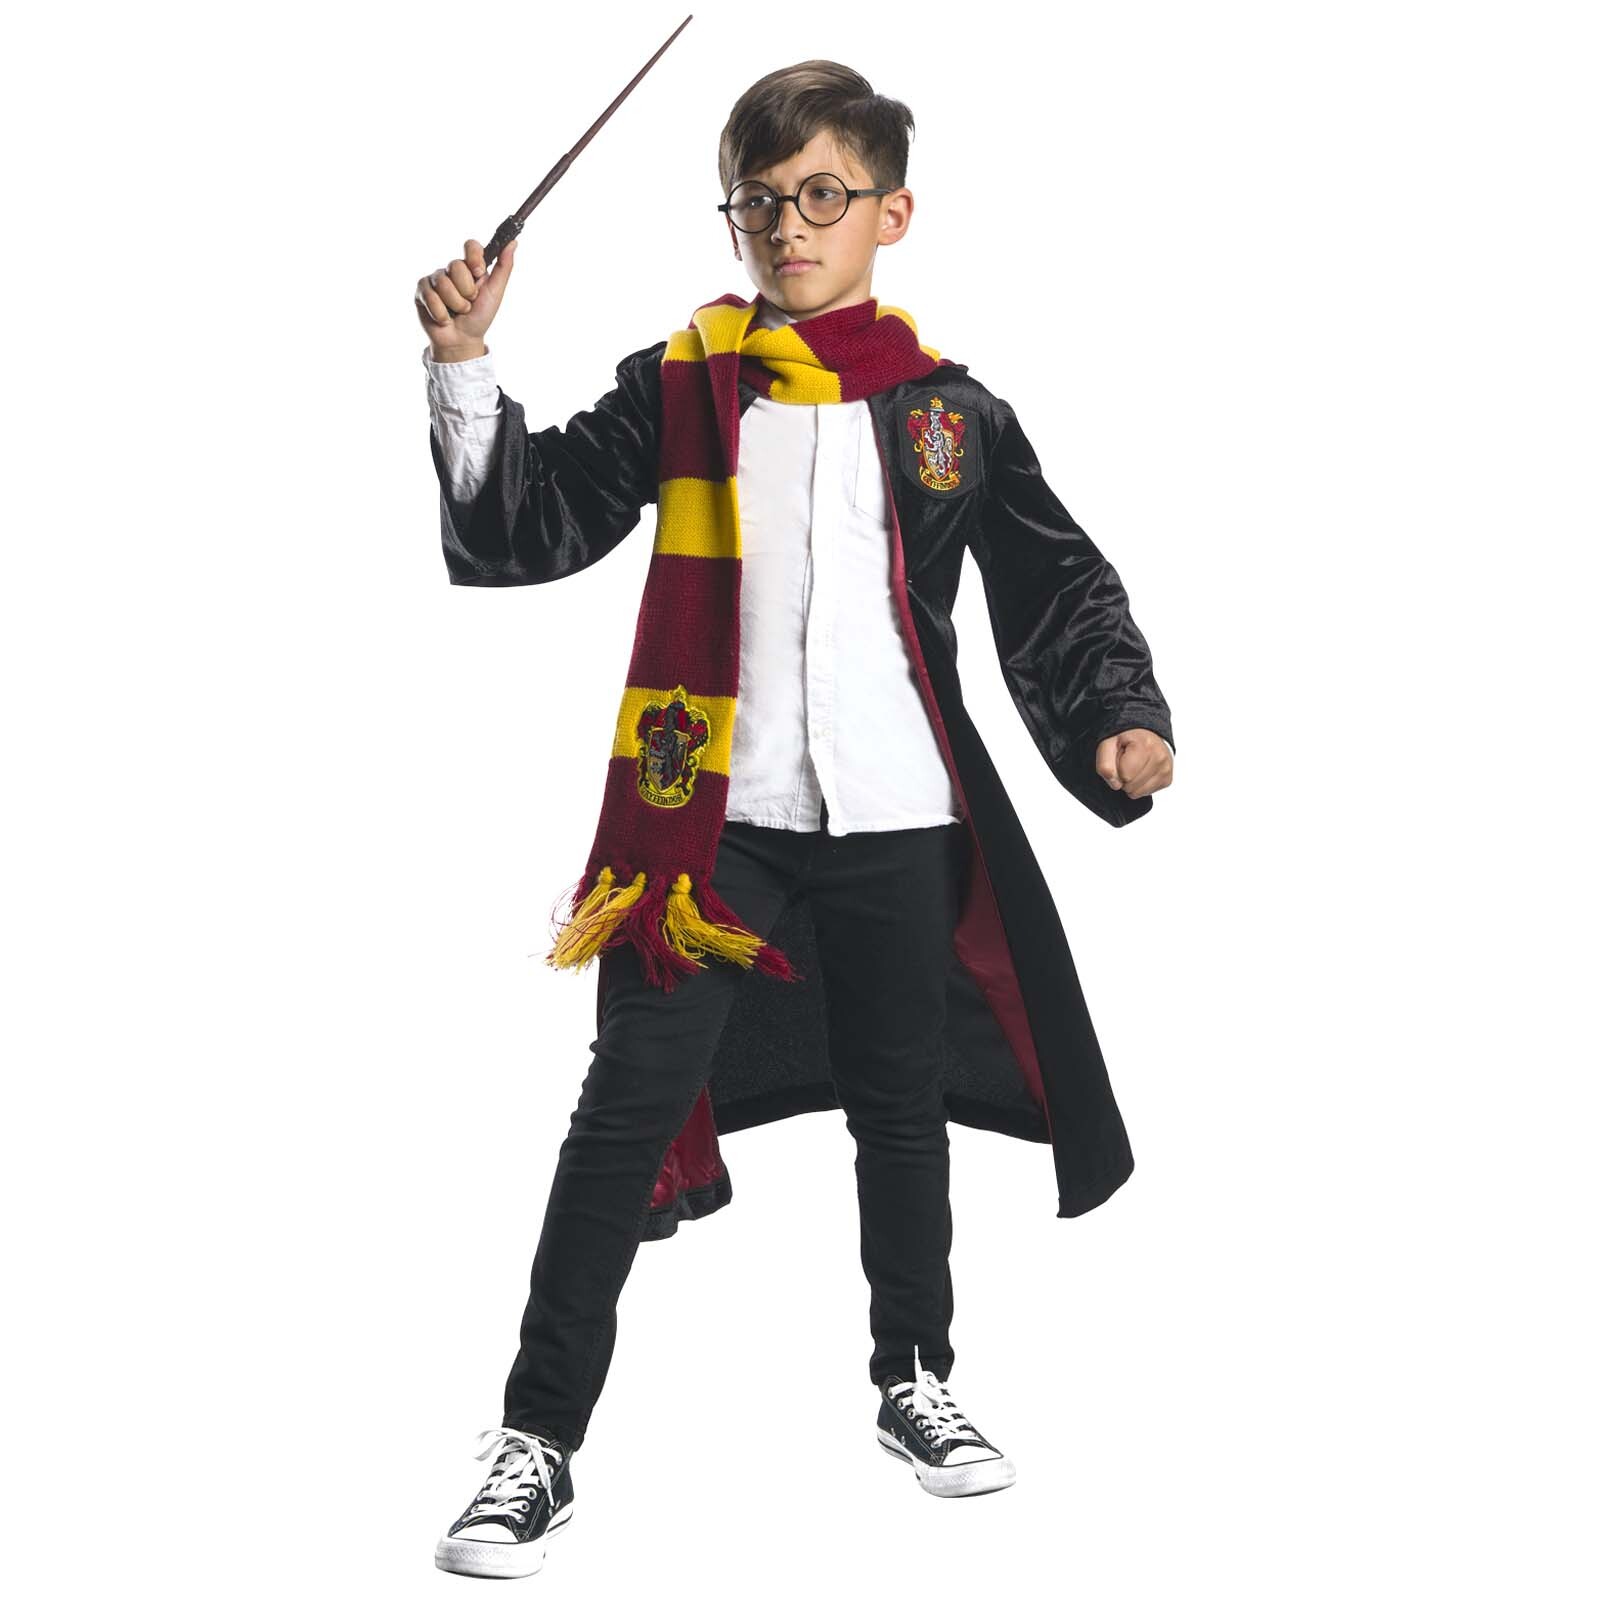 Harry Potter Cloak Costume & Accessories Set (For Kids & Adults